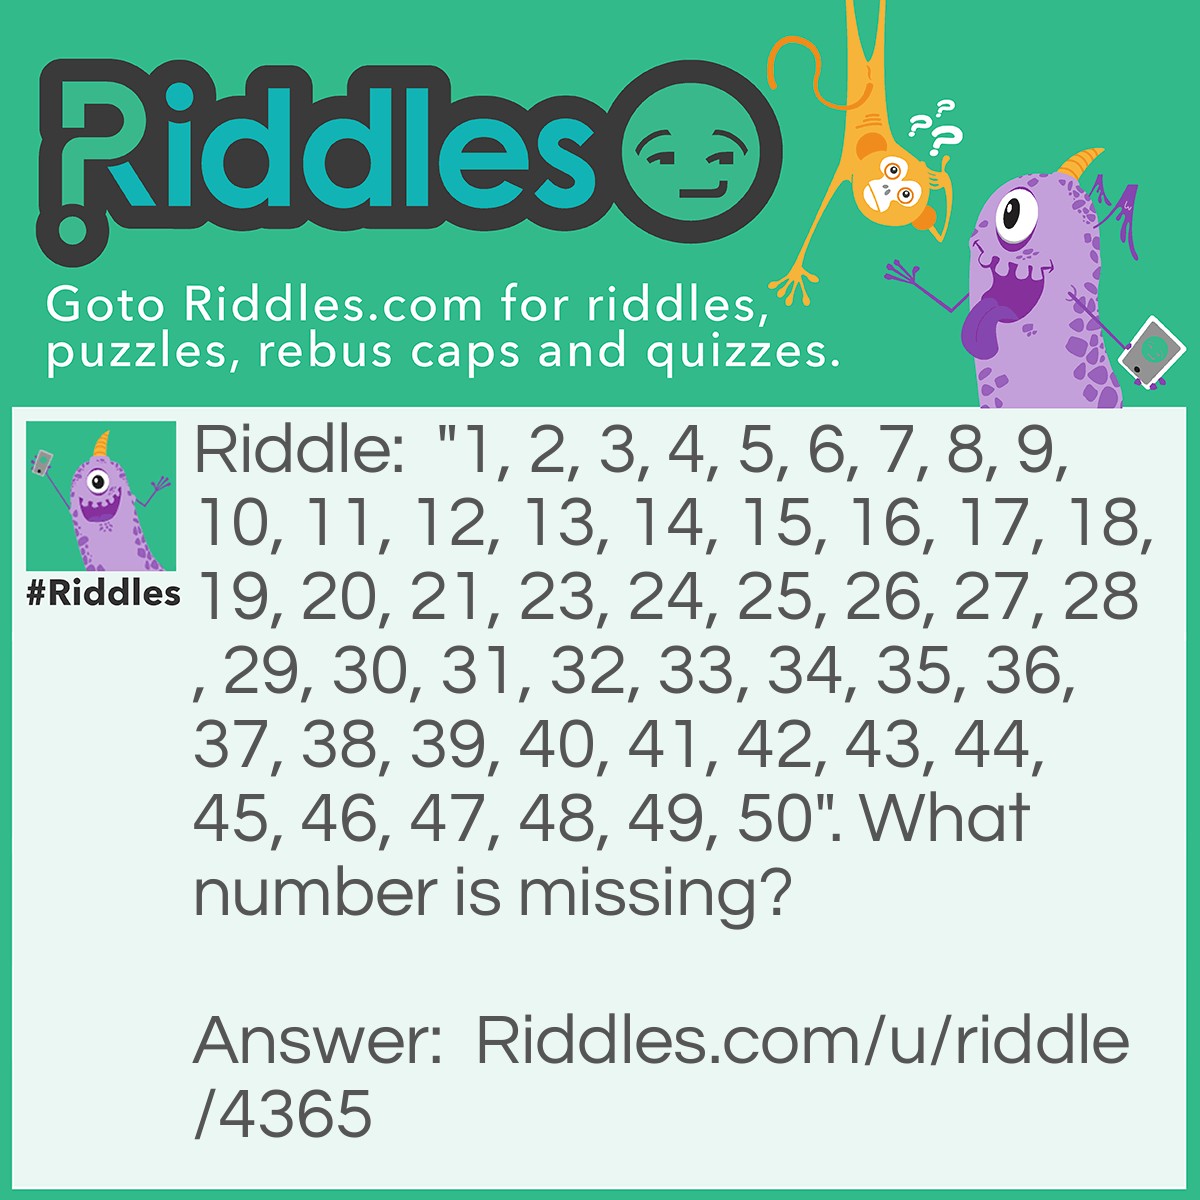 Riddle: "1, 2, 3, 4, 5, 6, 7, 8, 9, 10, 11, 12, 13, 14, 15, 16, 17, 18, 19, 20, 21, 23, 24, 25, 26, 27, 28, 29, 30, 31, 32, 33, 34, 35, 36, 37, 38, 39, 40, 41, 42, 43, 44, 45, 46, 47, 48, 49, 50". What number is missing? Answer: 22.